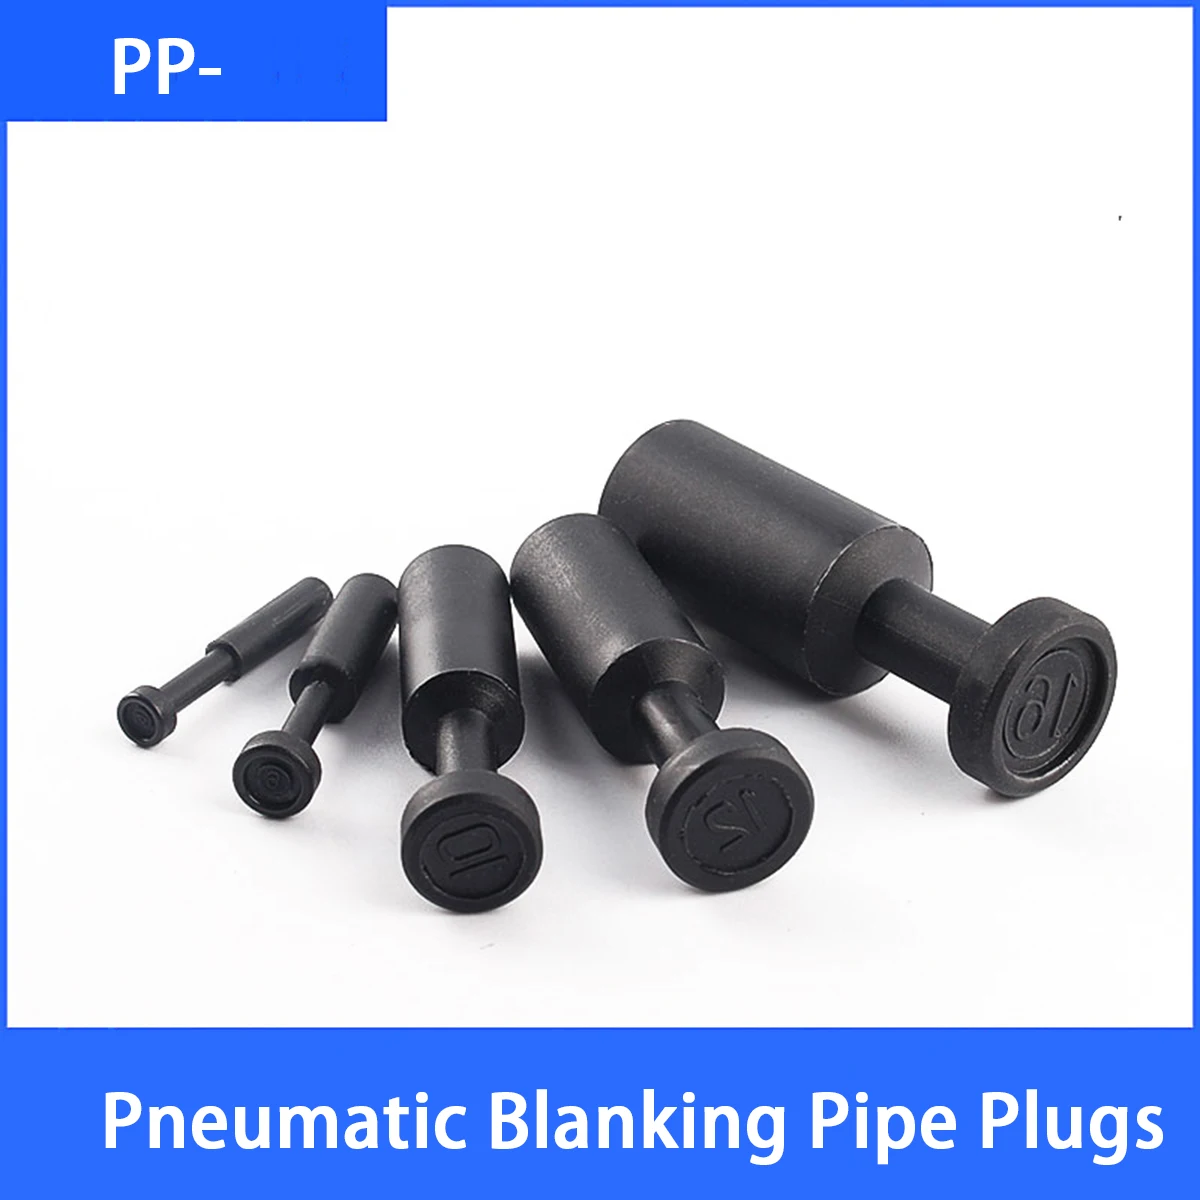 

1/5pc/Lot Pneumatic Blanking Pipe End Cup Plug Plugs Air Hose Tube Push Fit Connector Plastic pp4 pp6 pp8 pp10 pp12 pp16 4-16 mm